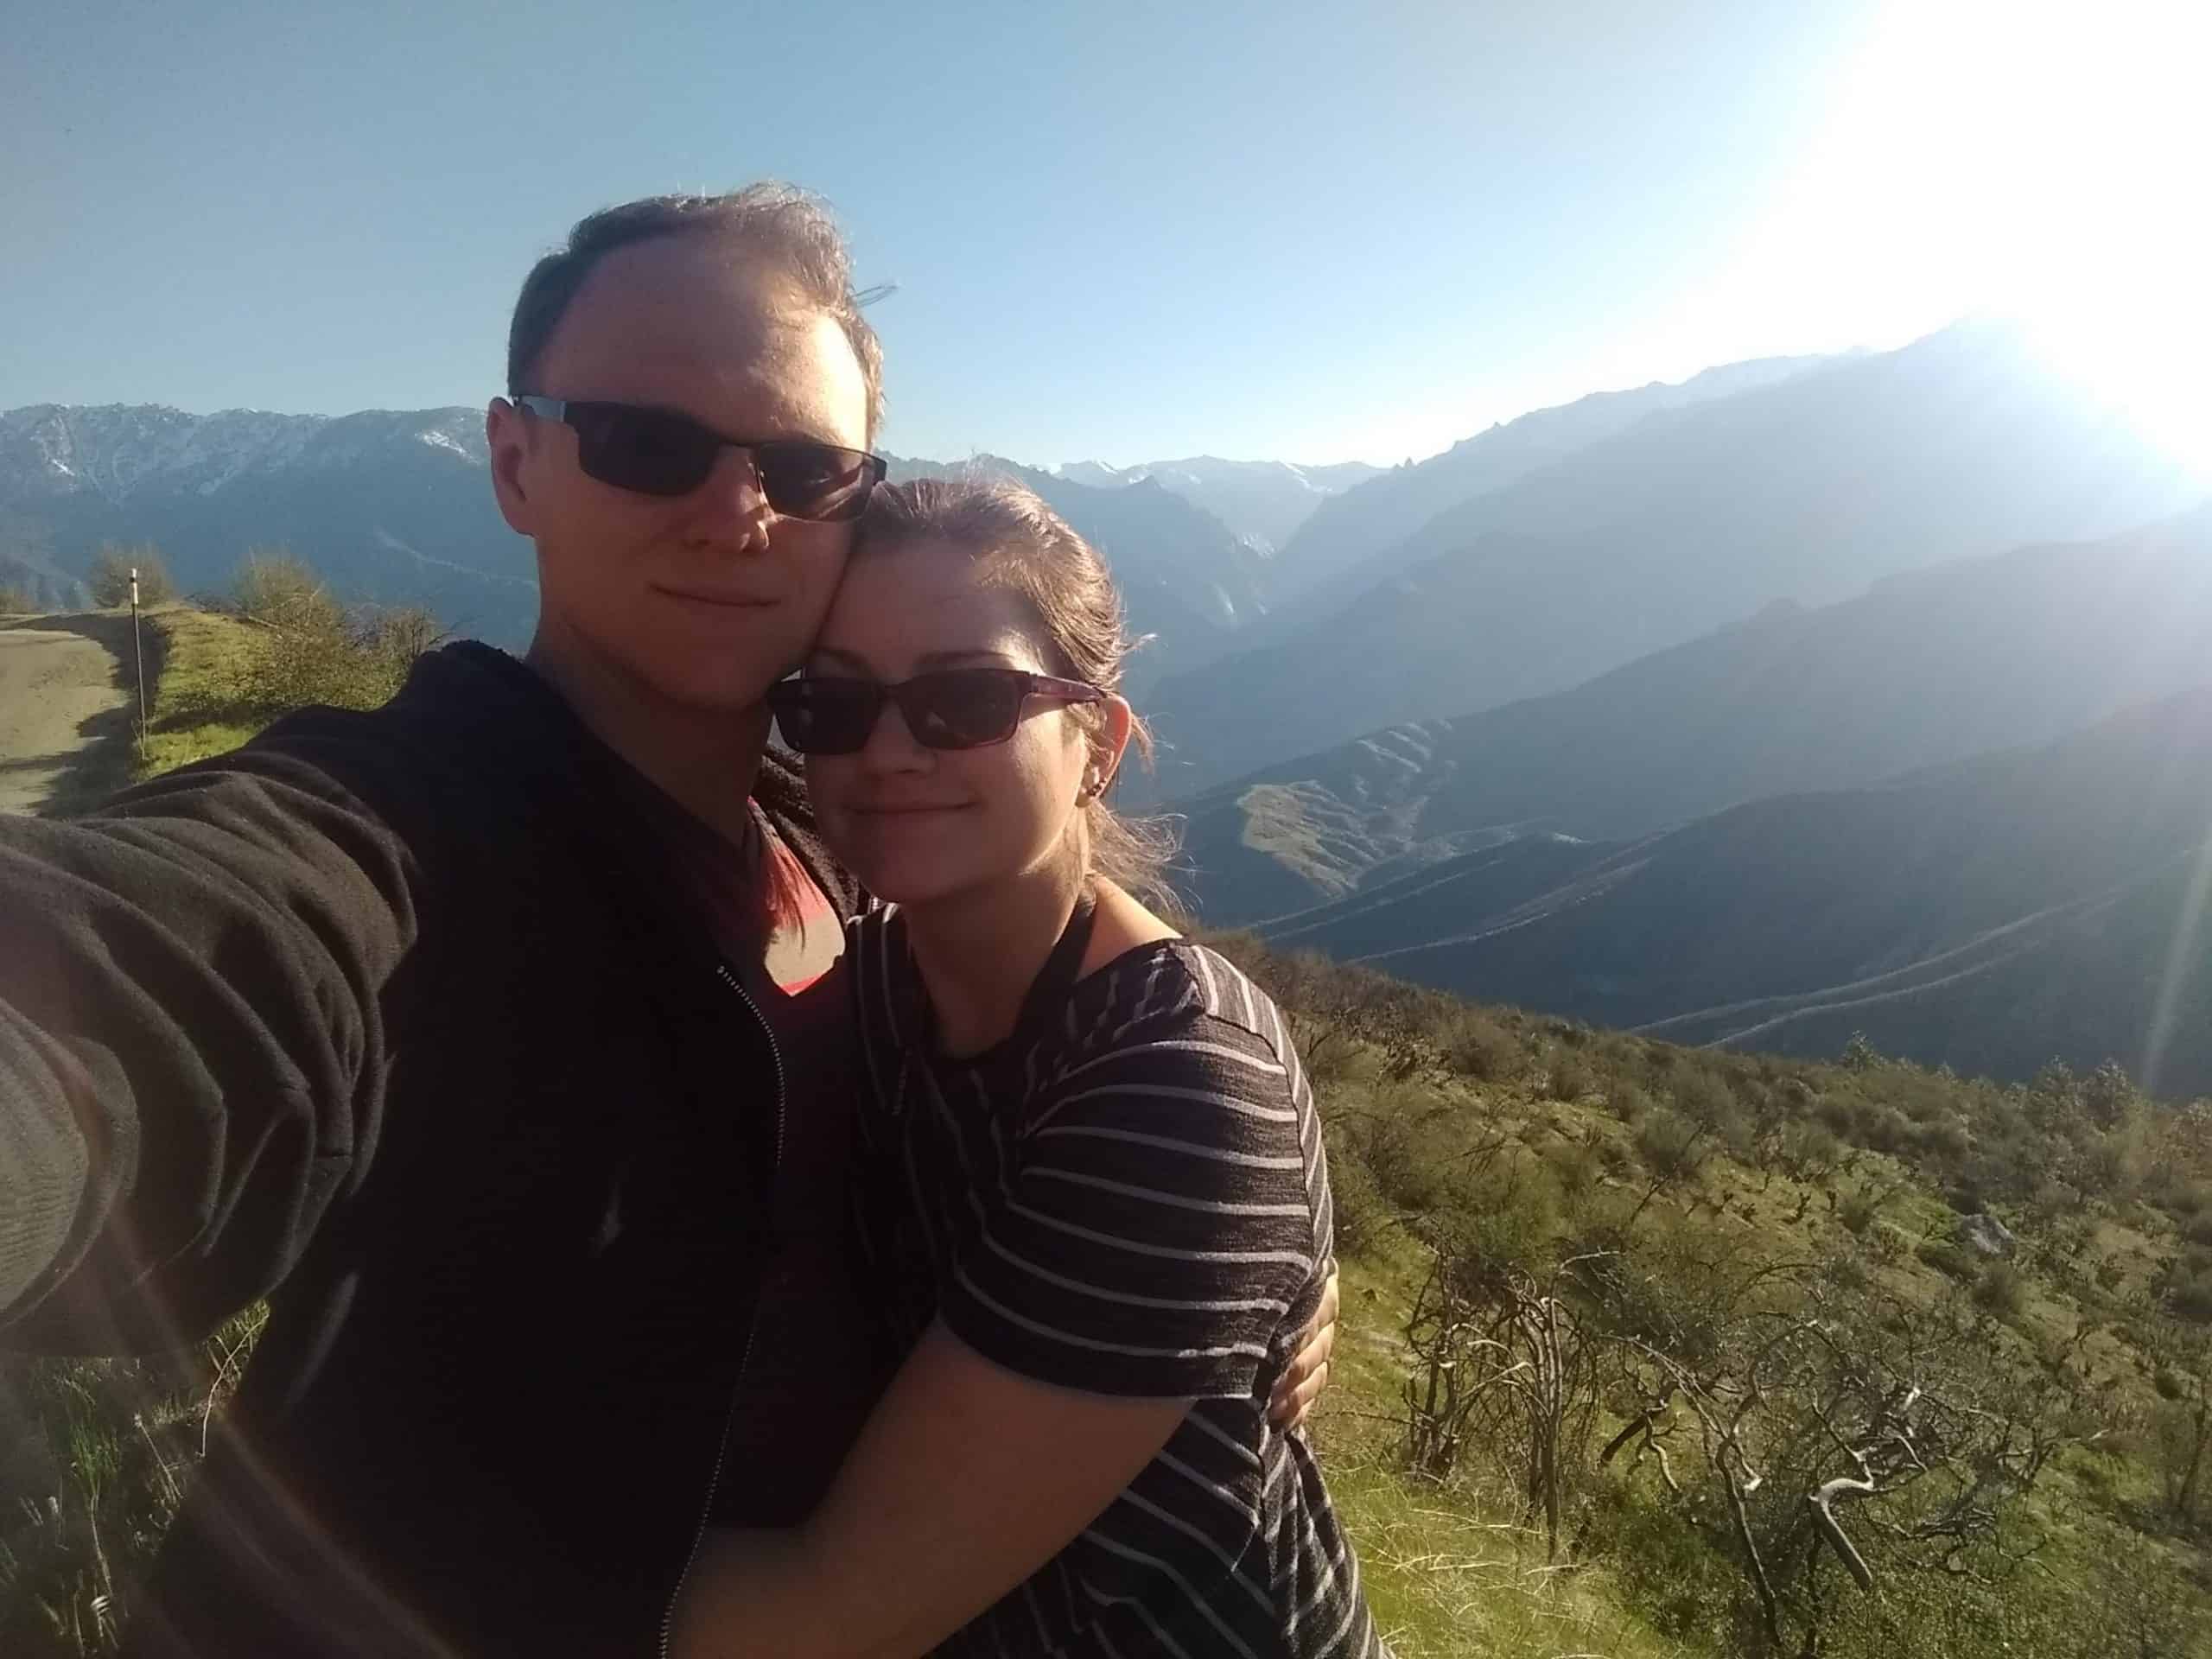 Derek and Kacie at a look off point in Sequoia National Park